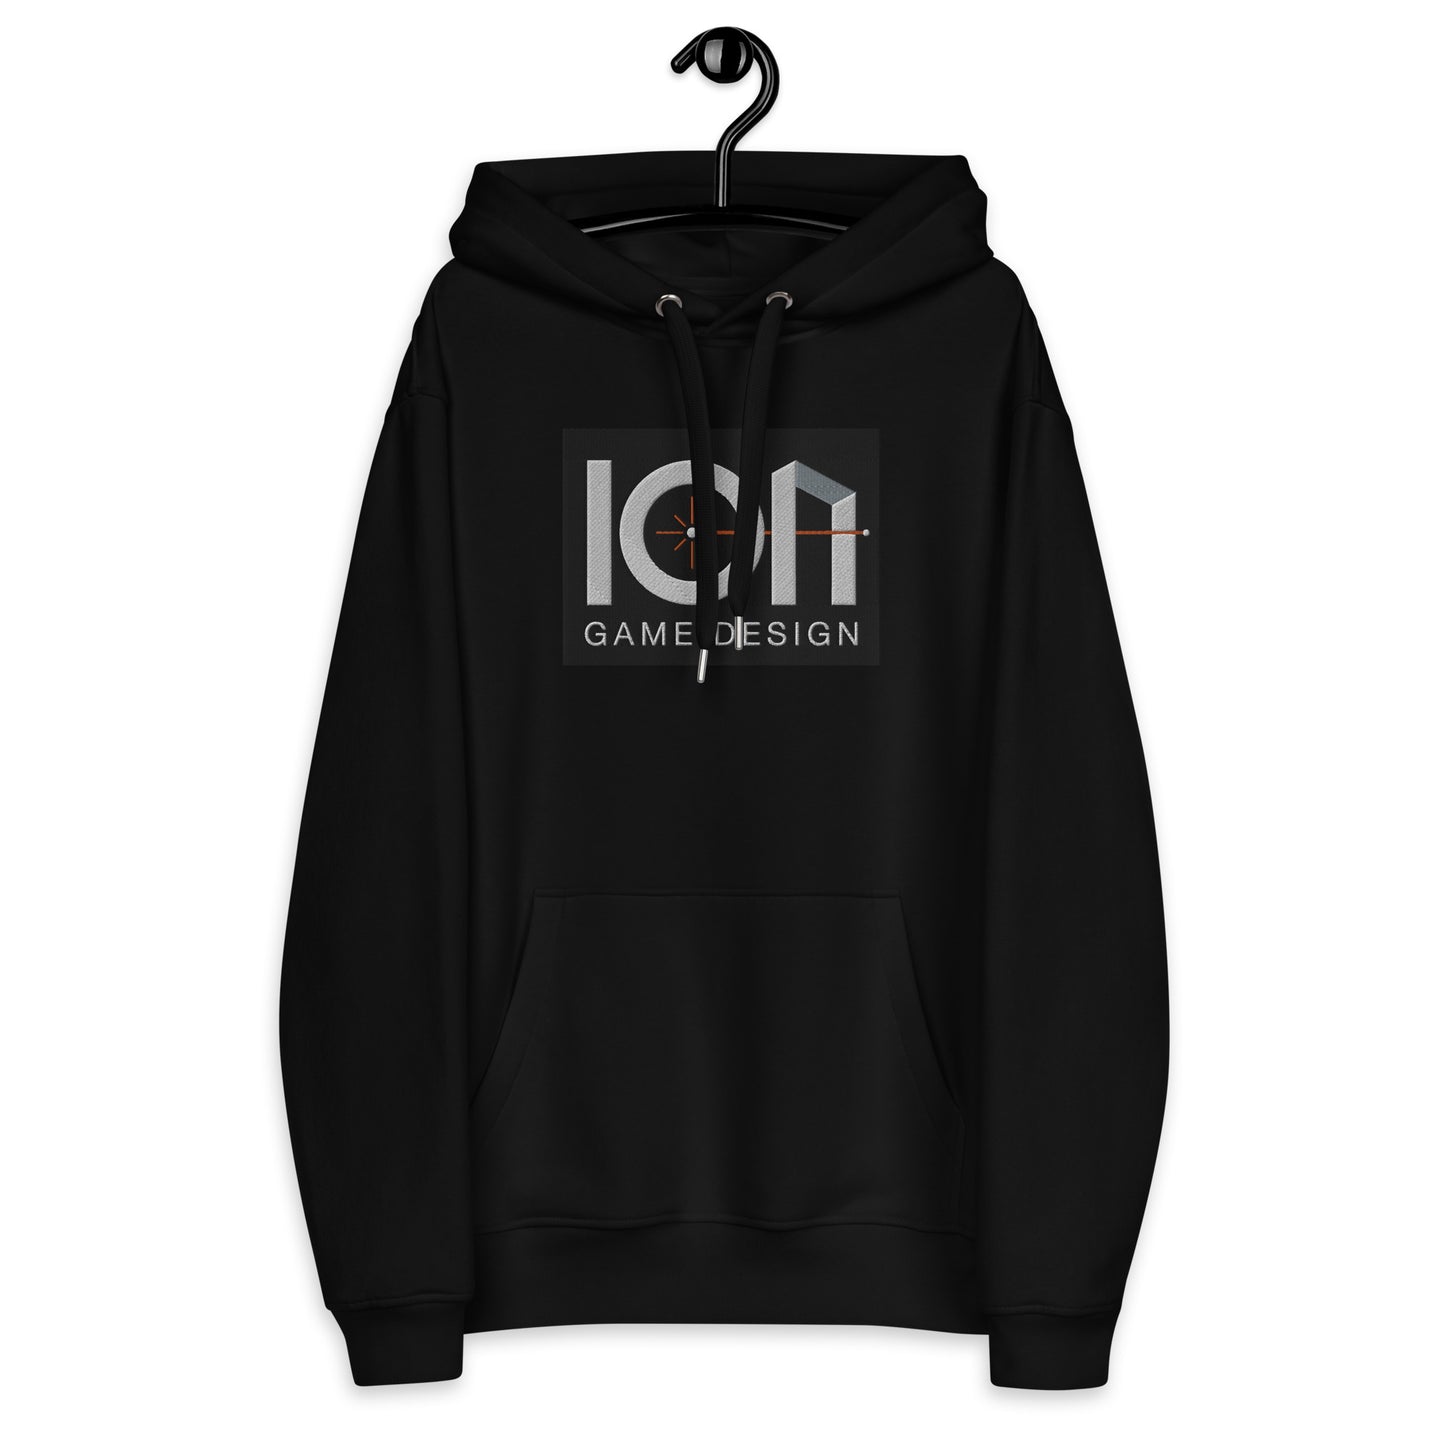 ION Game Design Premium ECO Hoodie - Black version of the hoodie embroidered with the company's logo